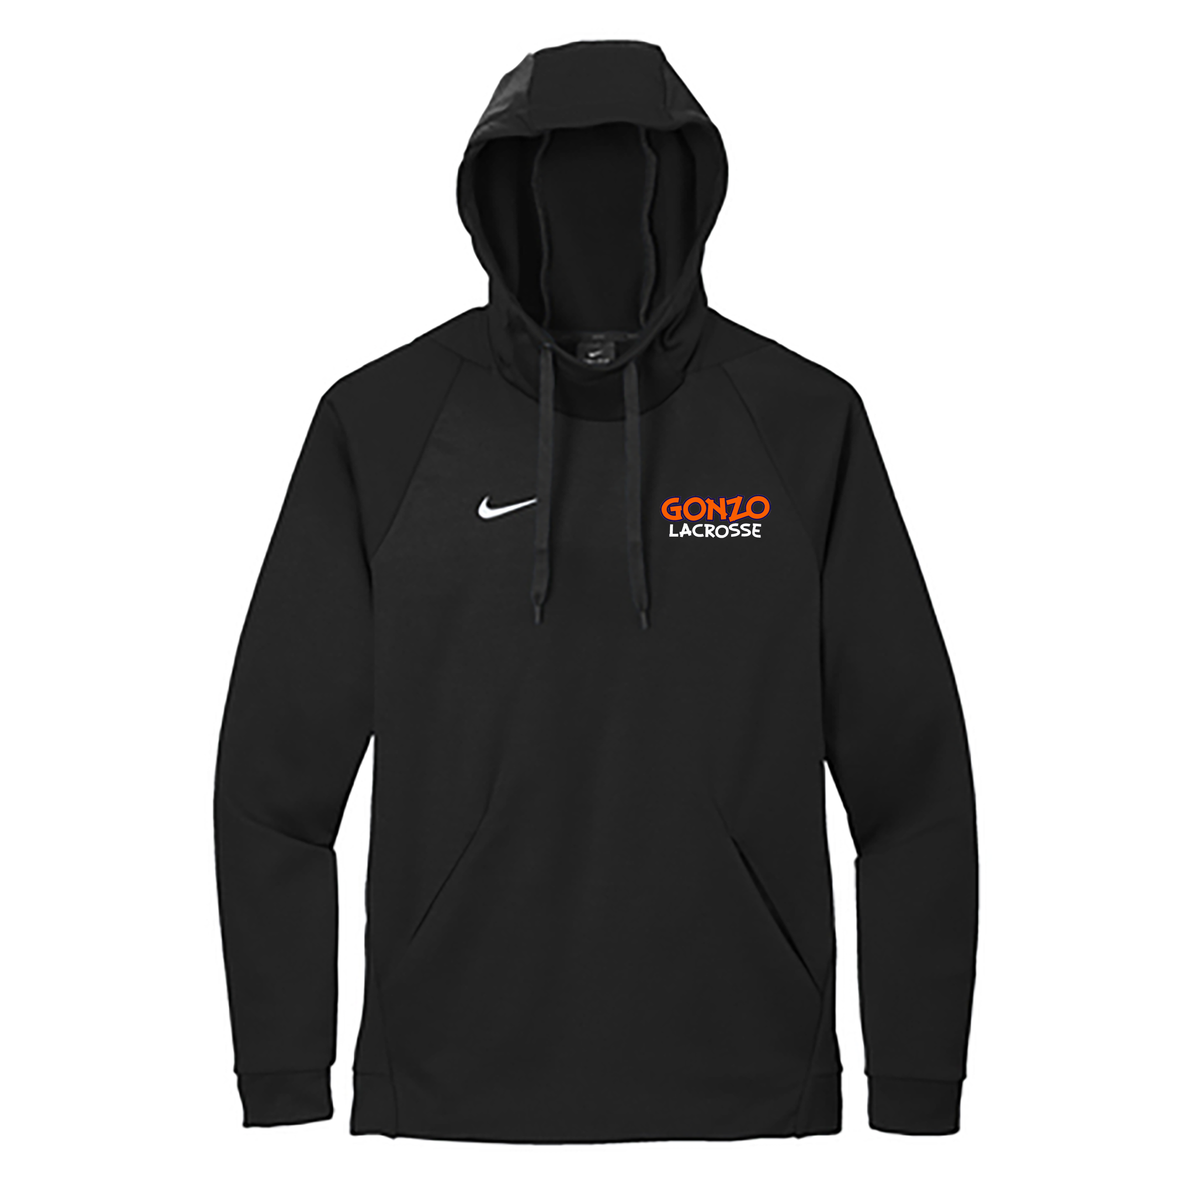 Gonzo Lacrosse Nike Therma-FIT Embroidered Hoodie